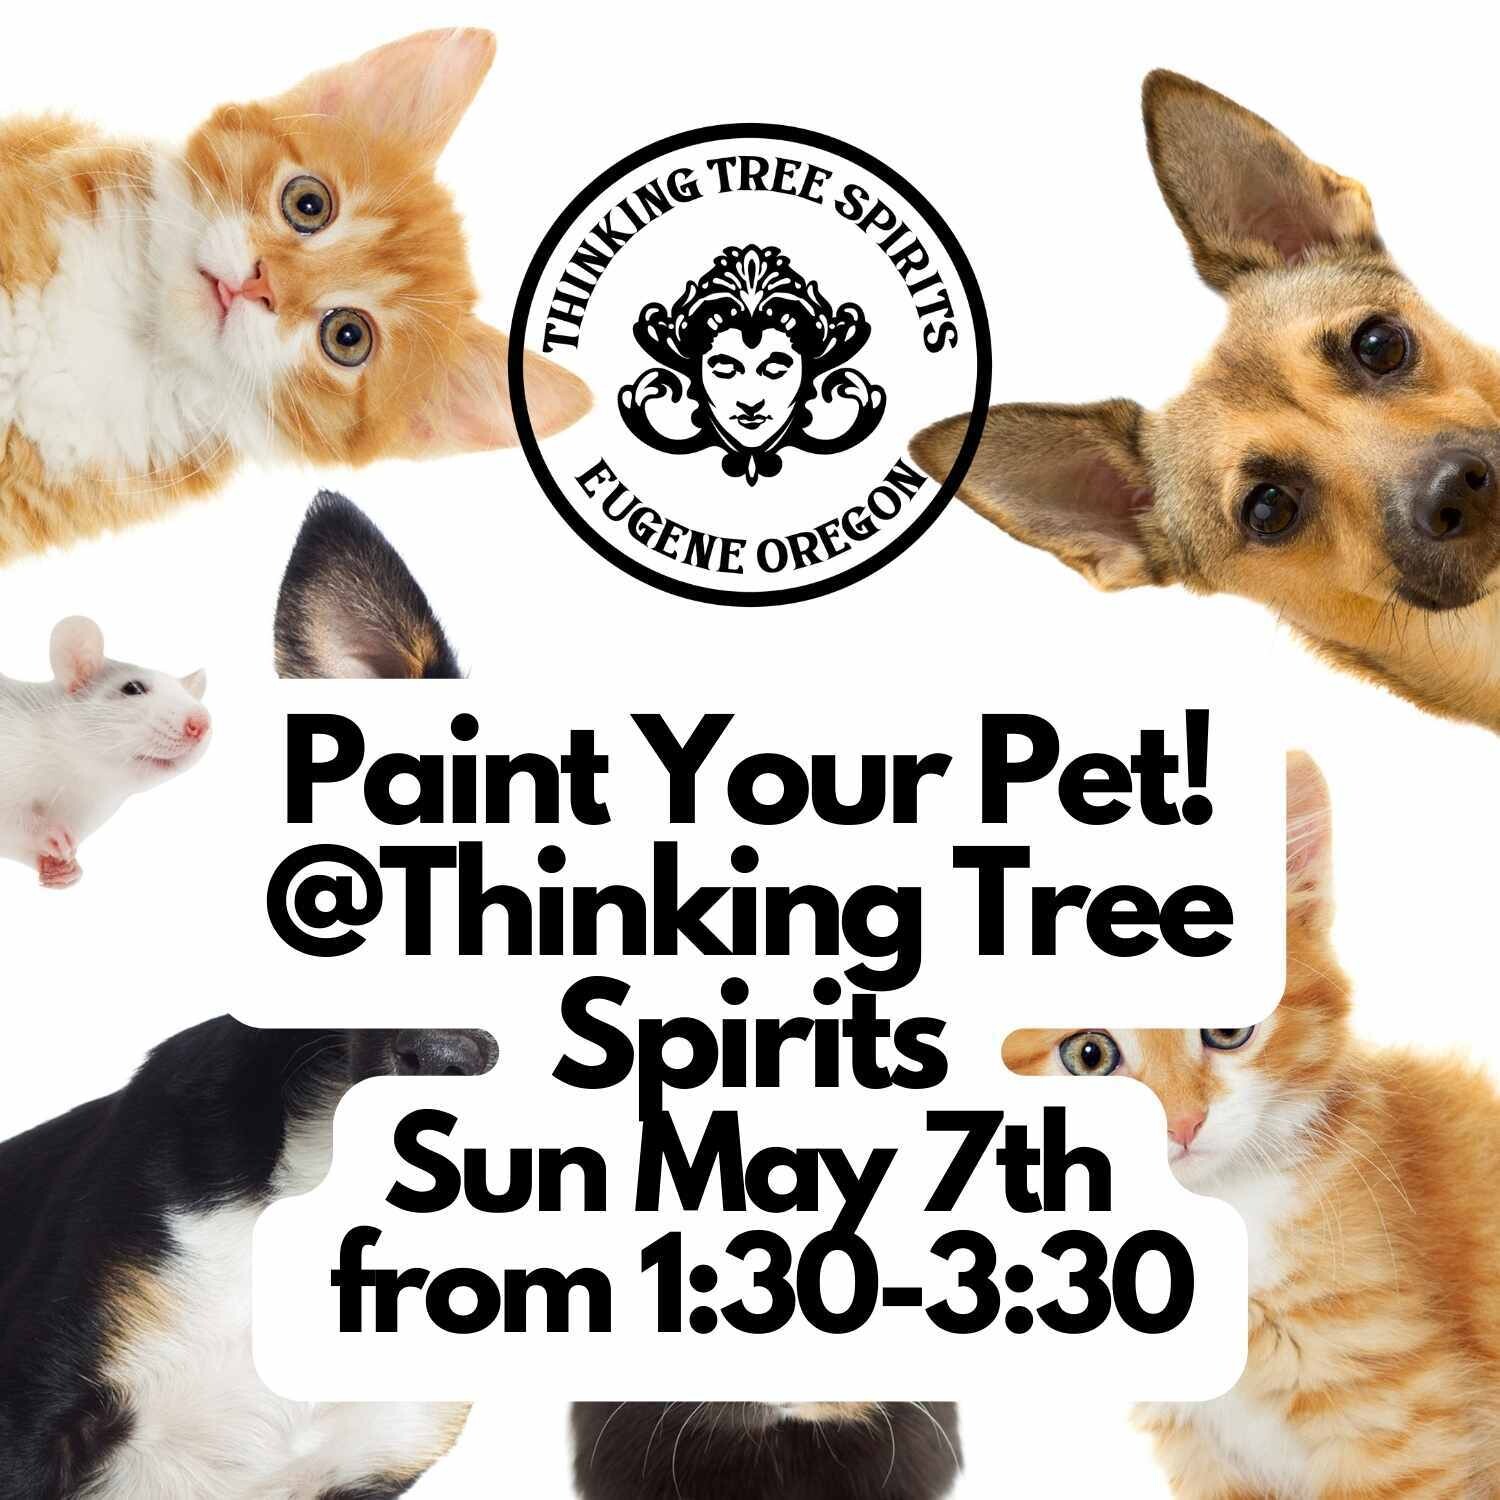 Paint your Pet Night at Thinking Tree Spirits! May 7th @1:30-3:30pm